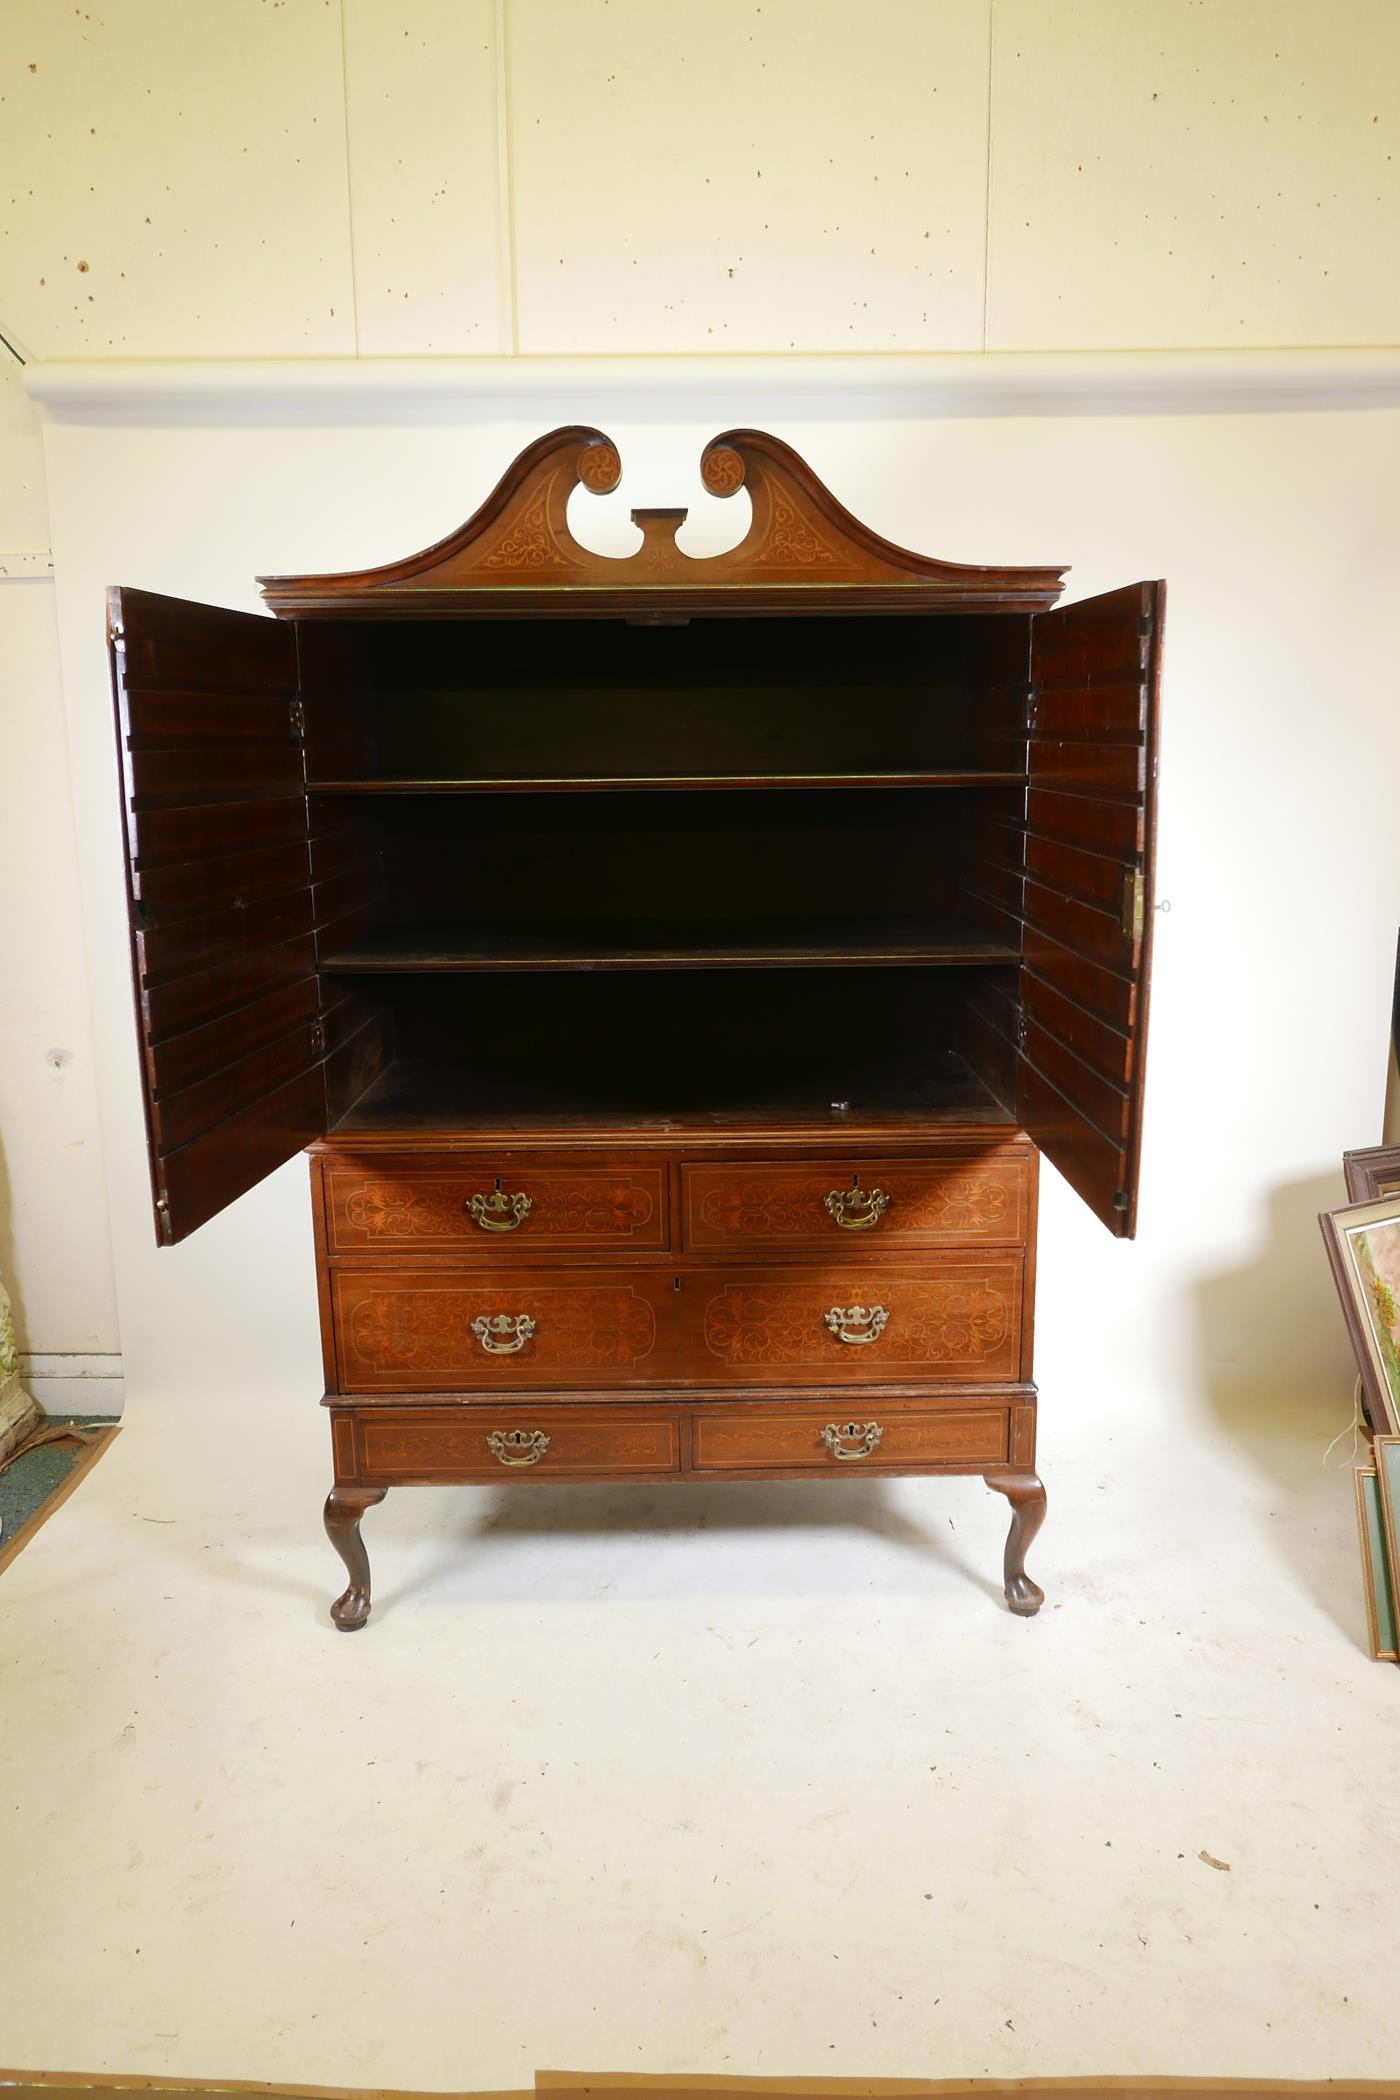 A C19th plum pudding mahogany press cupboard, with inlaid seaweed panel panels, the upper section - Image 5 of 5